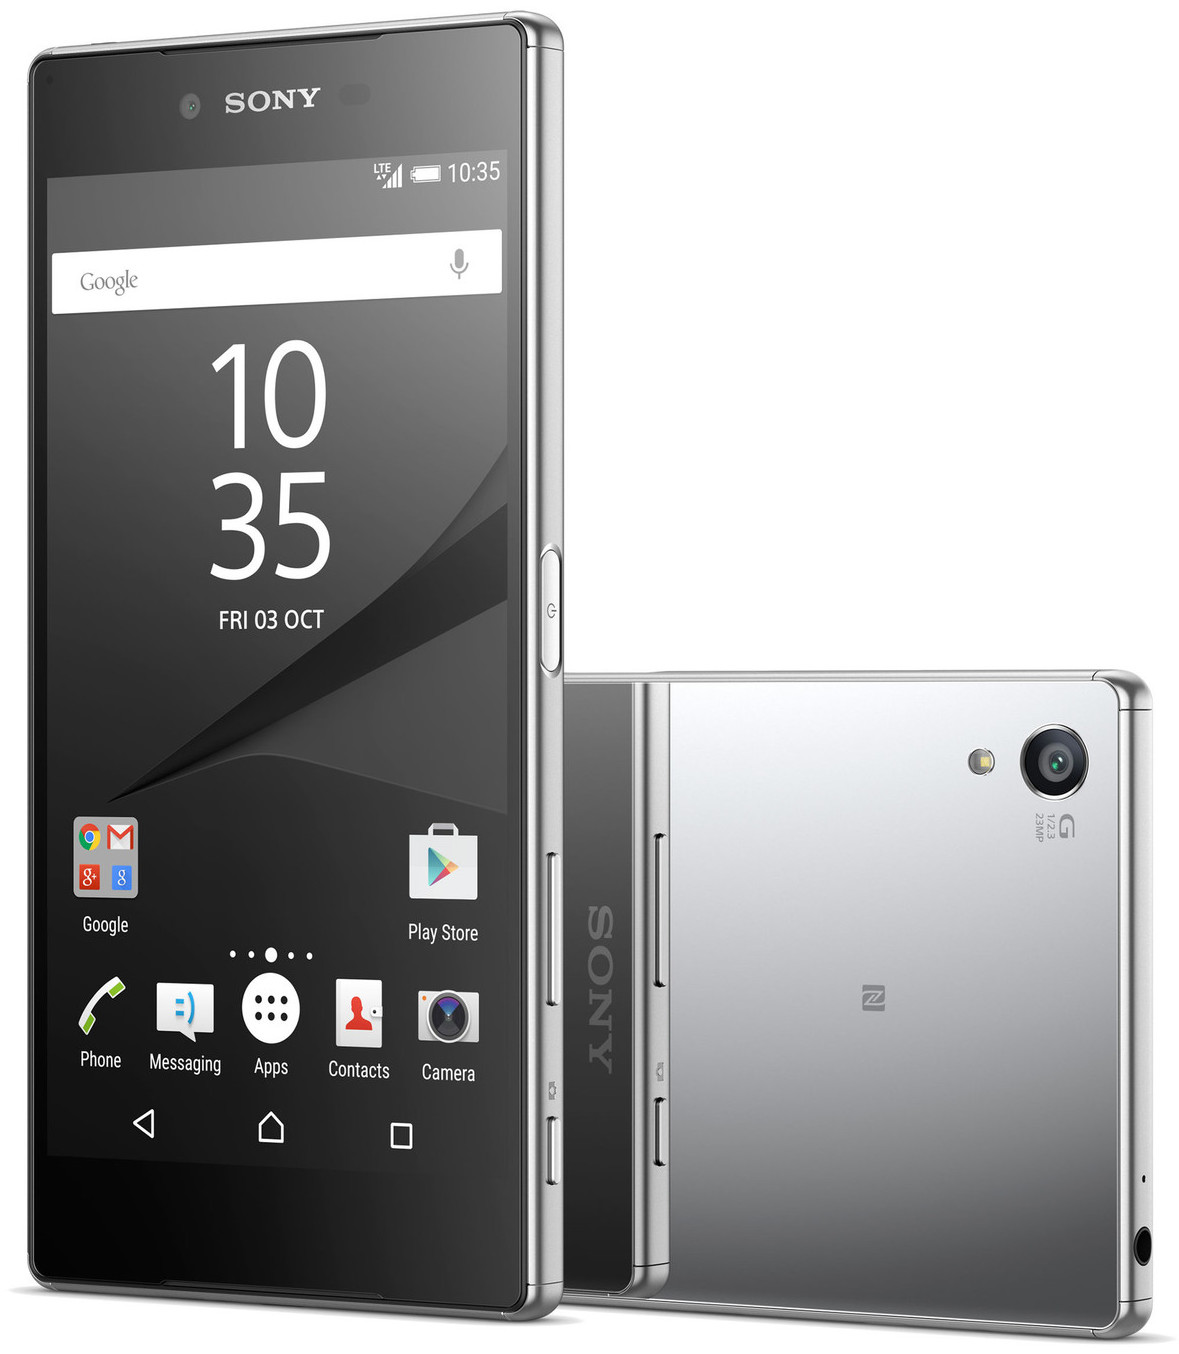 7 Best Ways To Remove Or Bypass Privacy Protection Password (Anti-theft) On   SONY Xperia Premium Dual E6833.